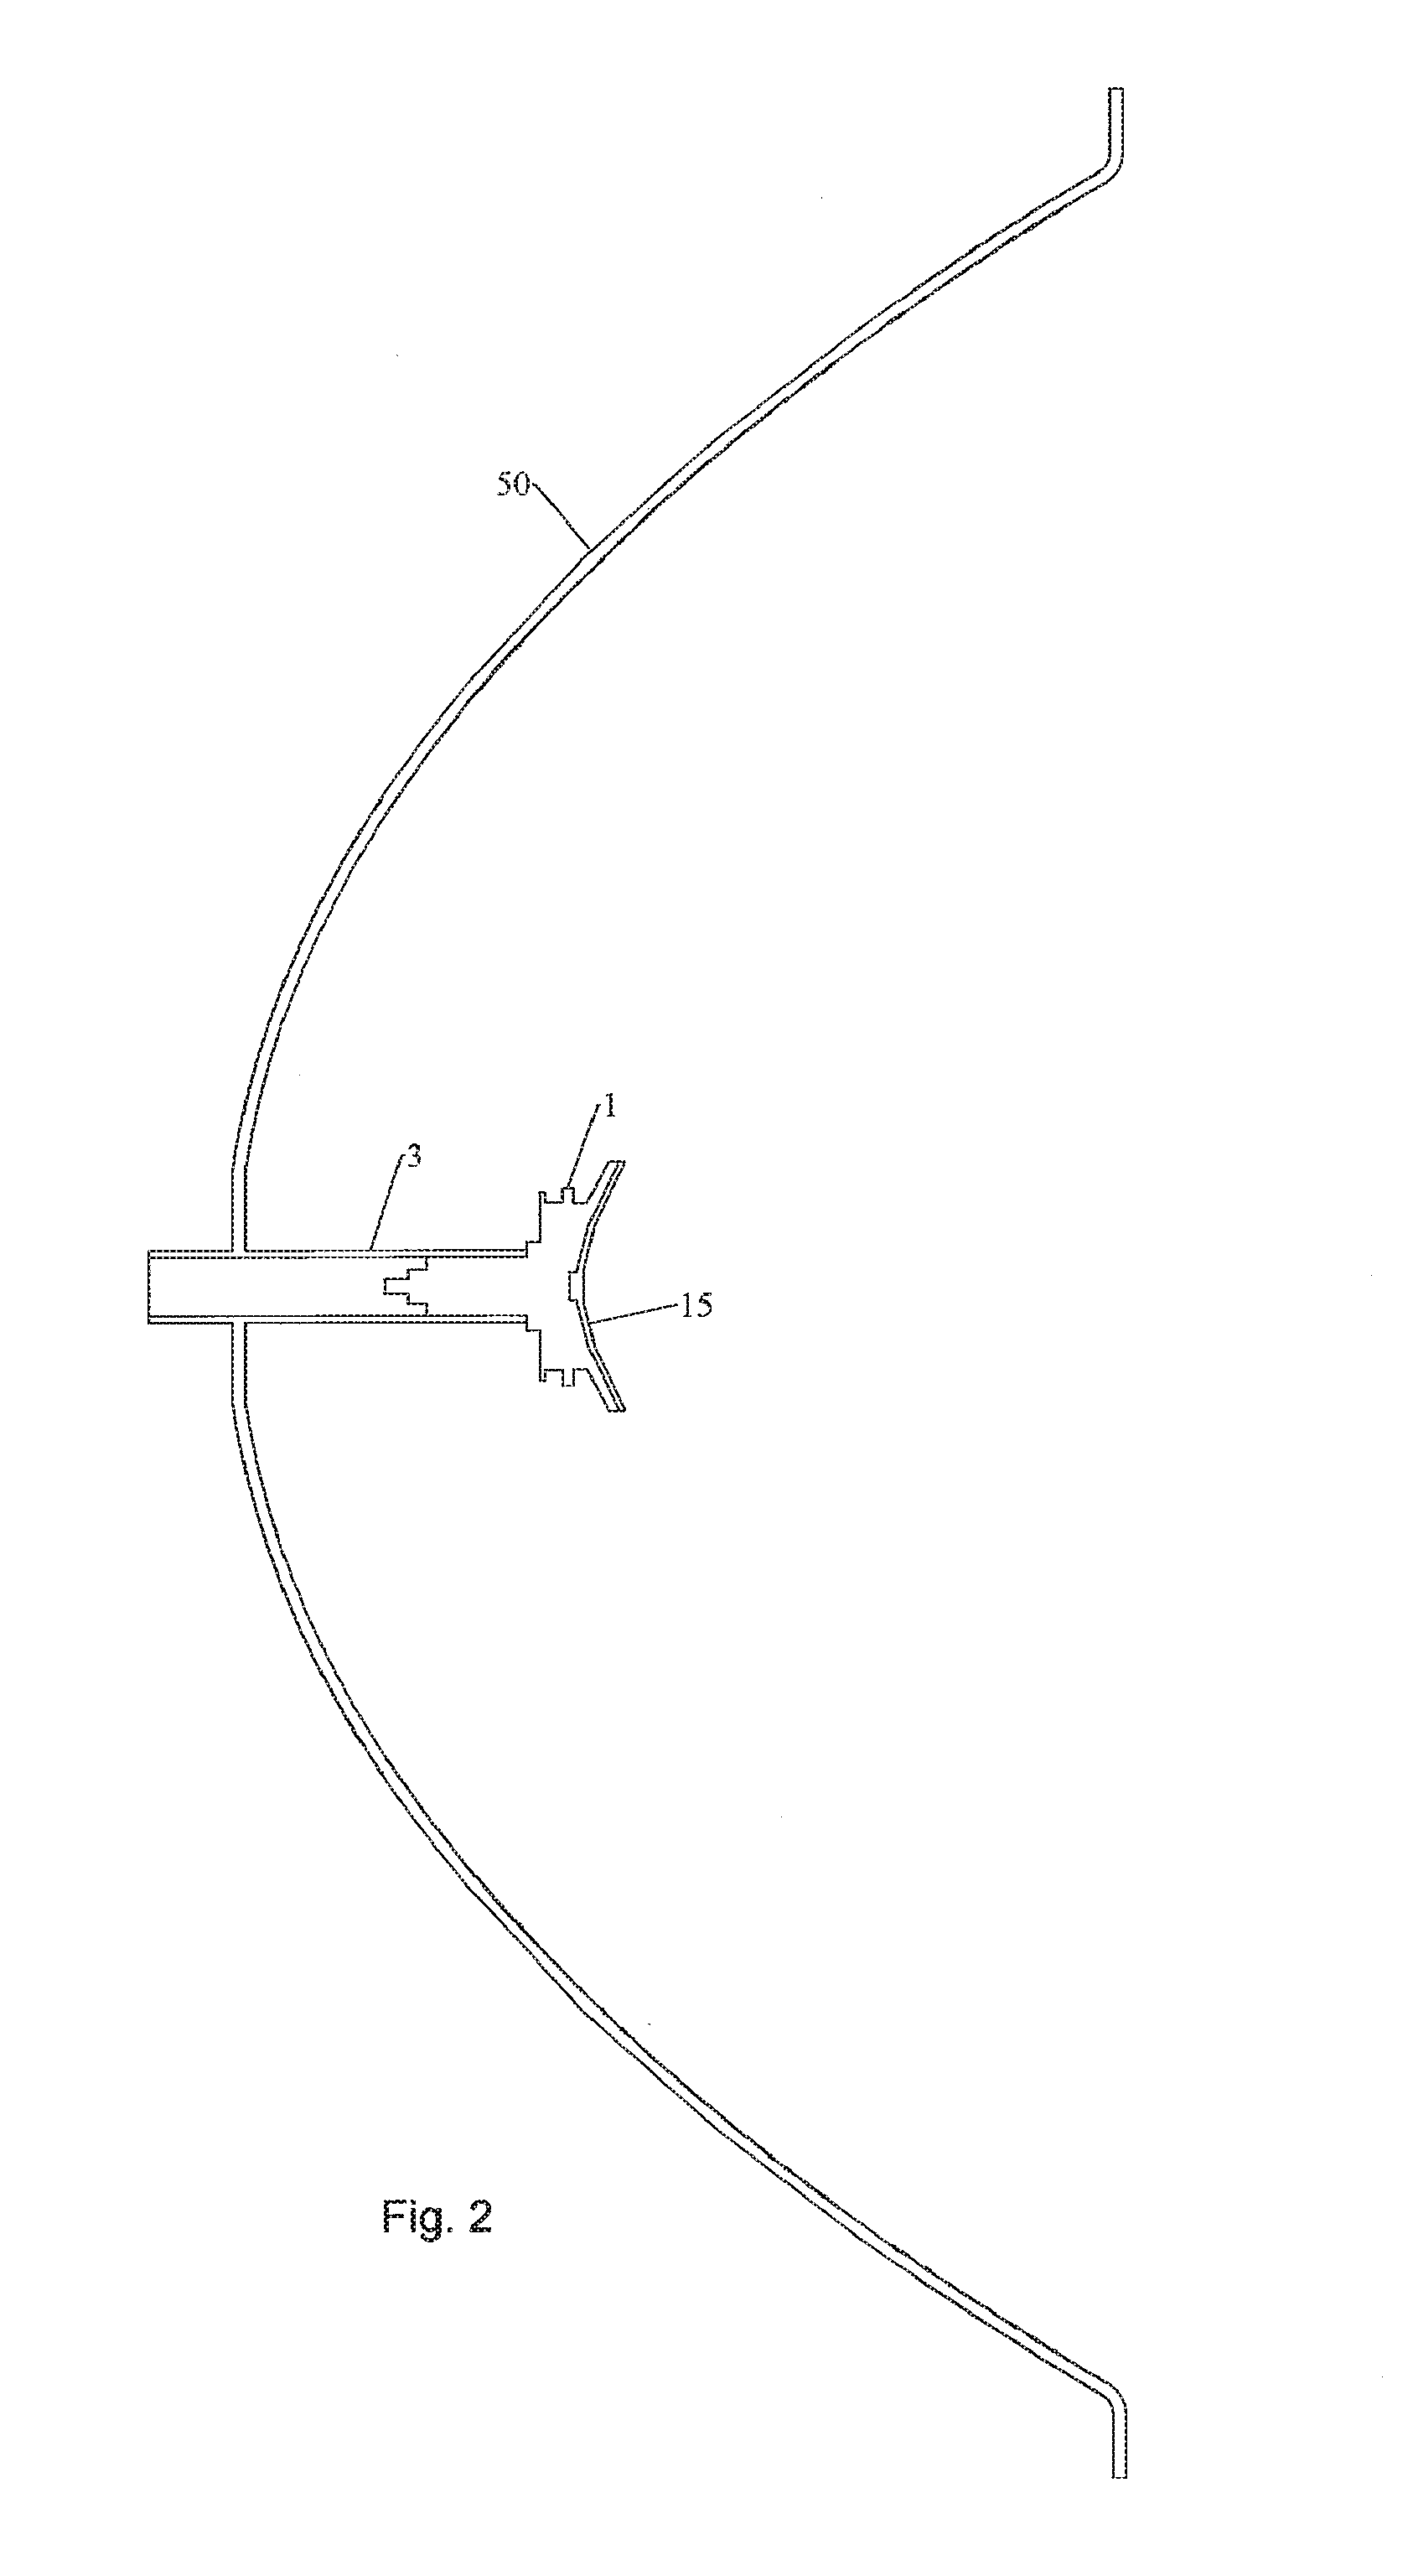 Method for dish reflector illumination via sub-reflector assembly with dielectric radiator portion